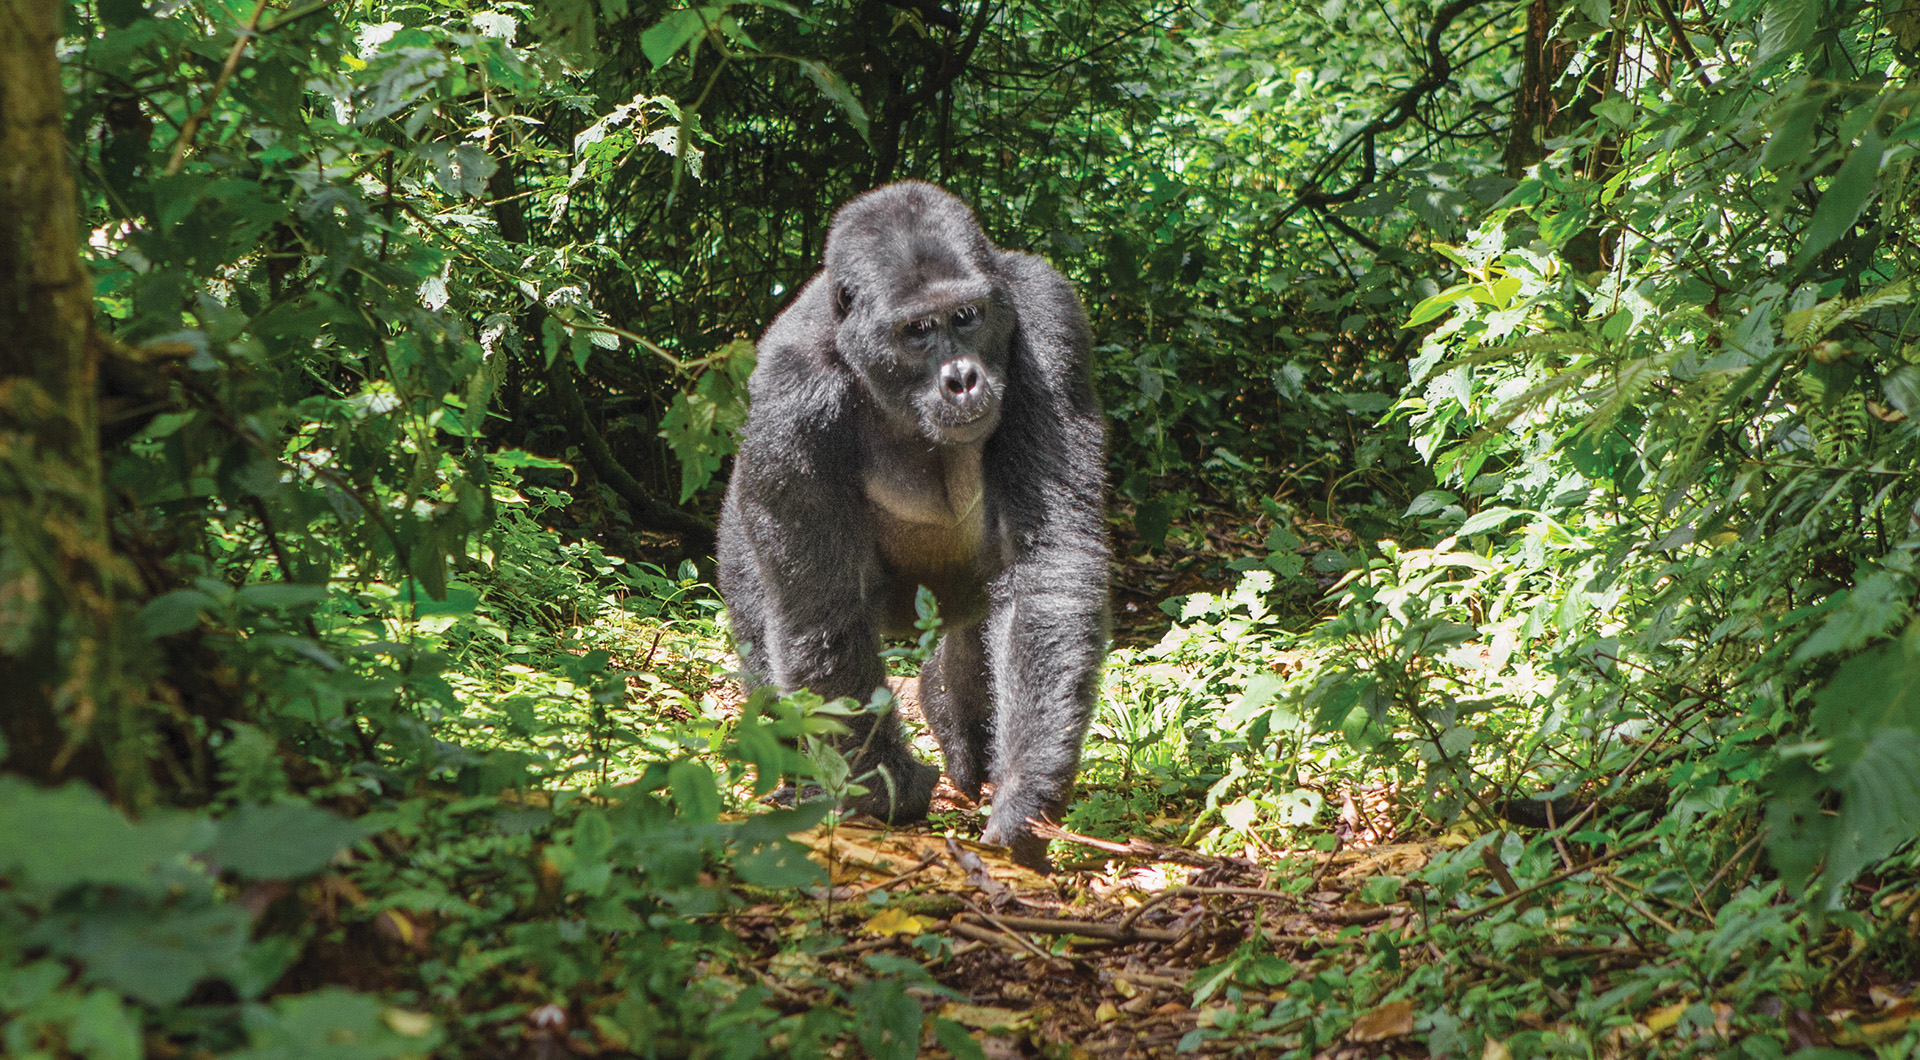 Image of single gorilla walking through the forest